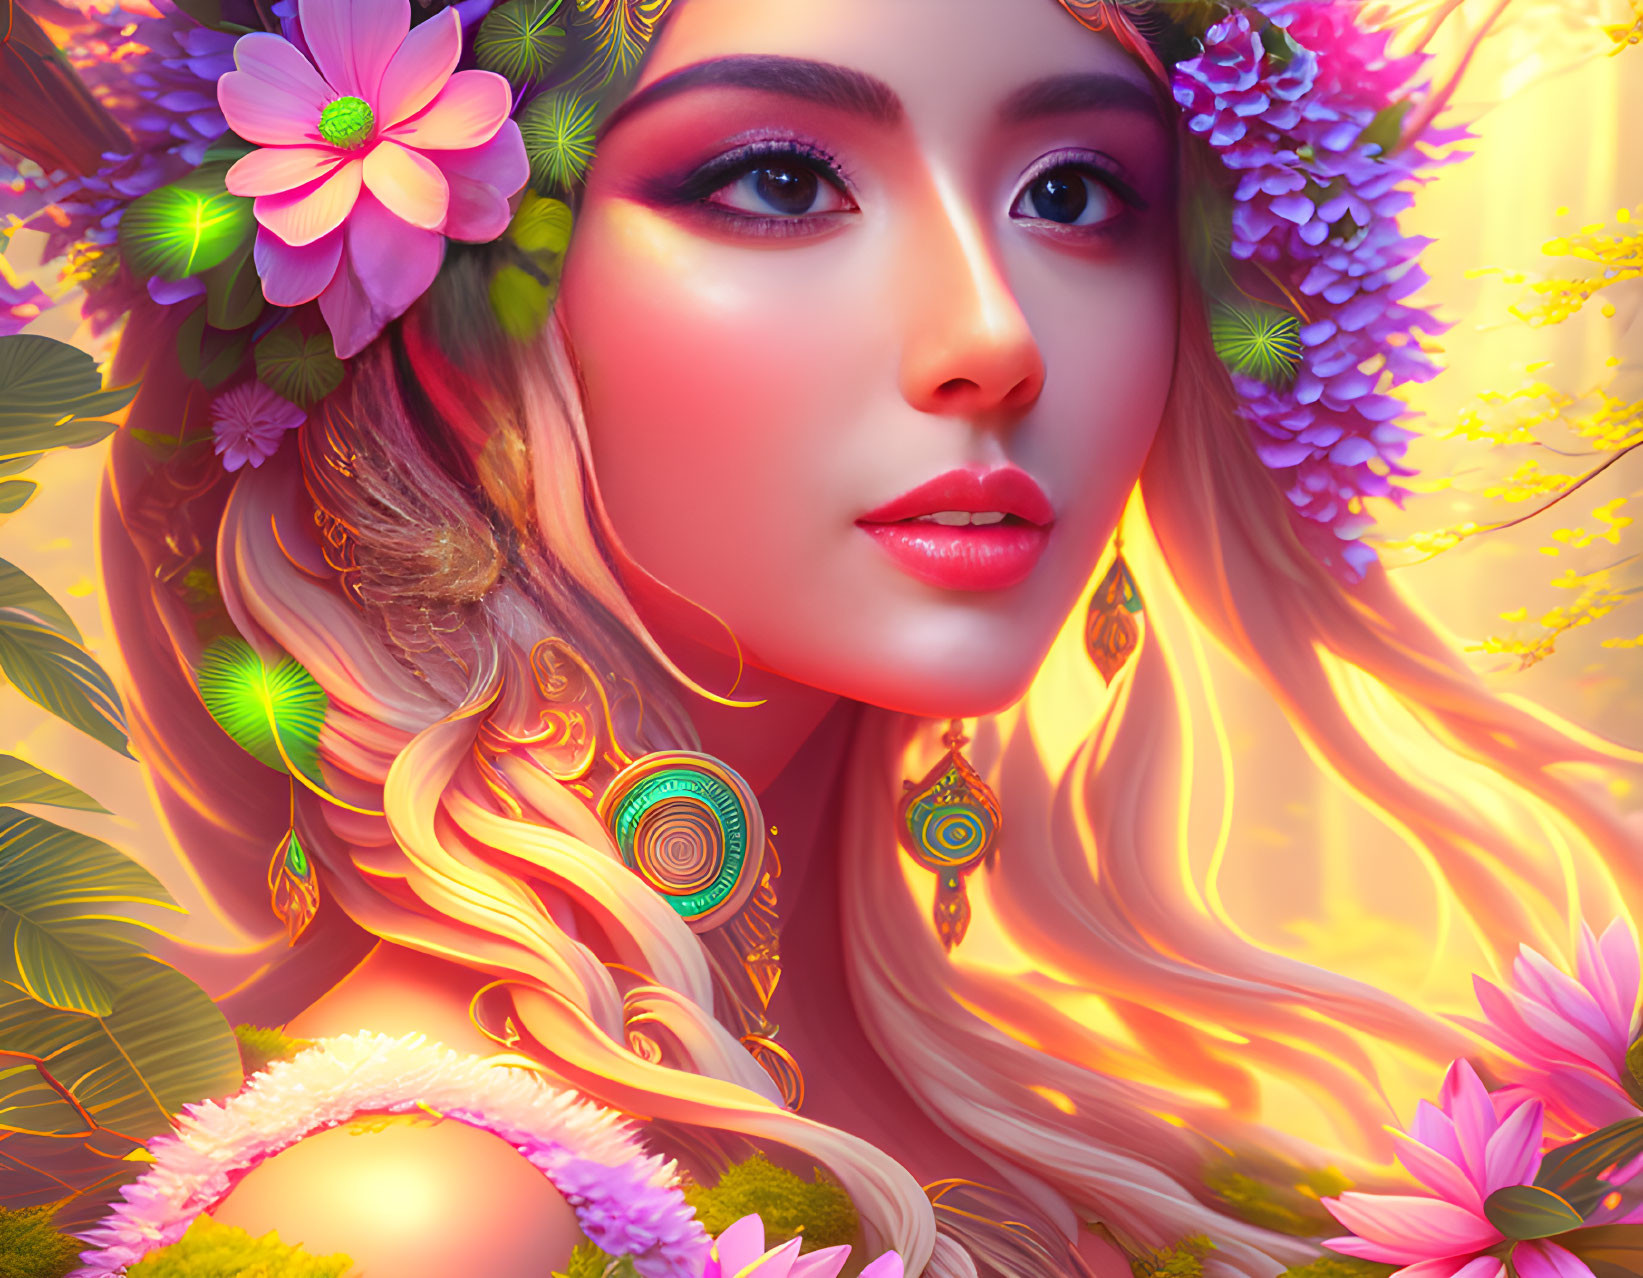 Vibrant digital artwork: Woman with golden hair, colorful makeup, and floral hair accessories.